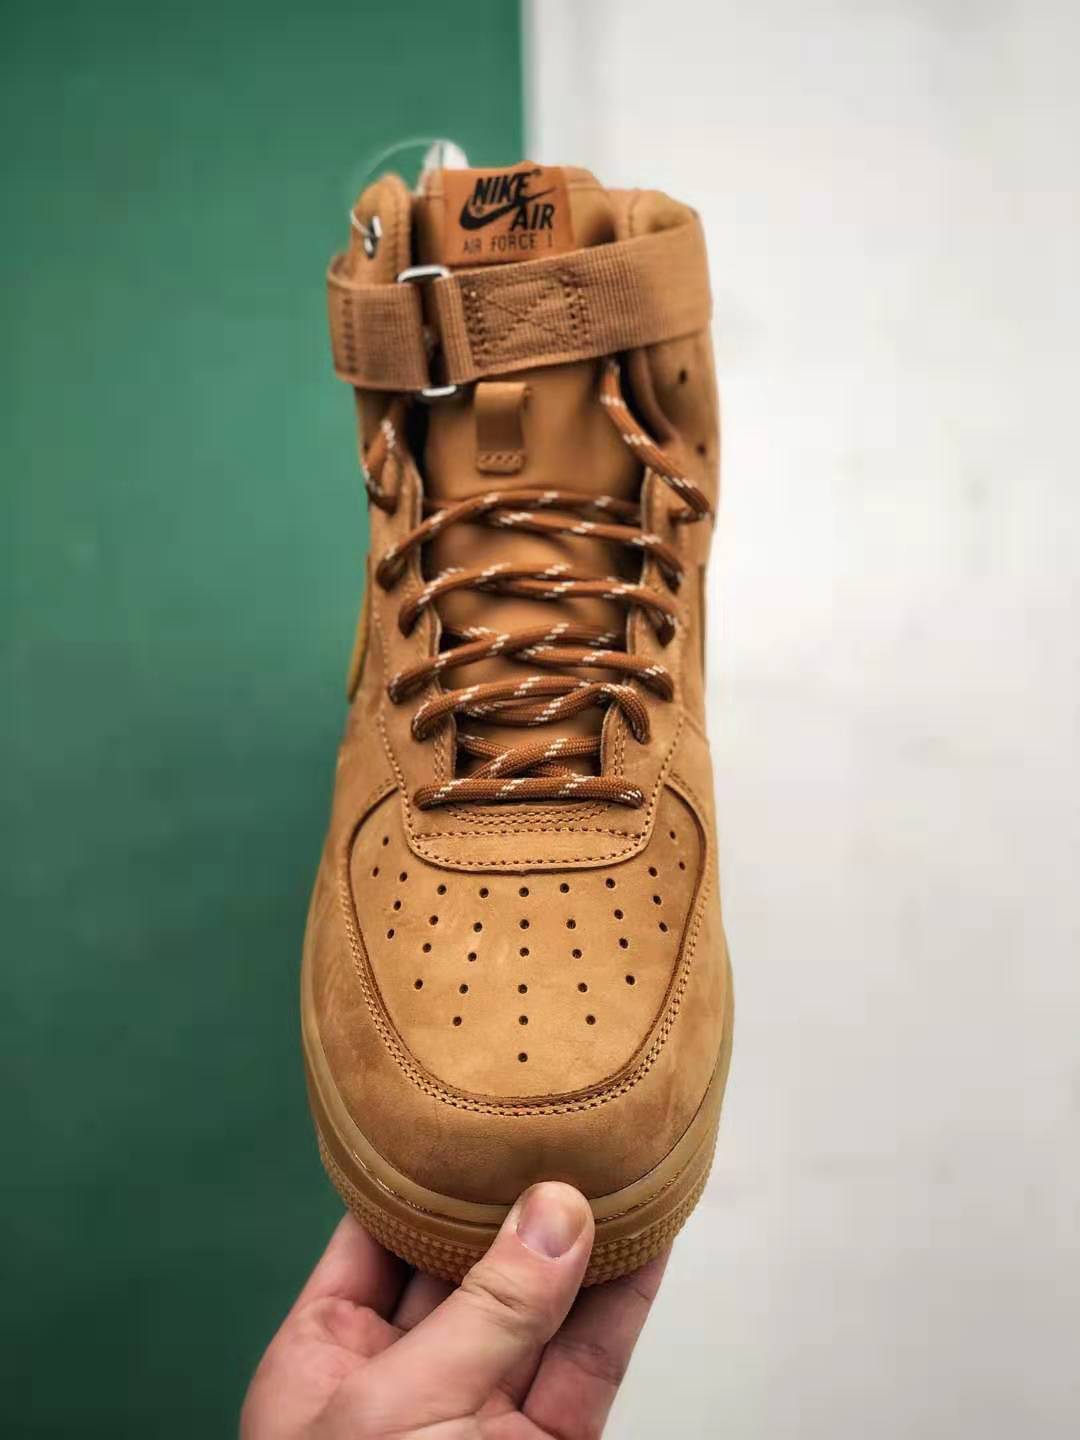 Nike Air Force 1 High Flax CJ9178-200 - Iconic Style and Unbeatable Performance!